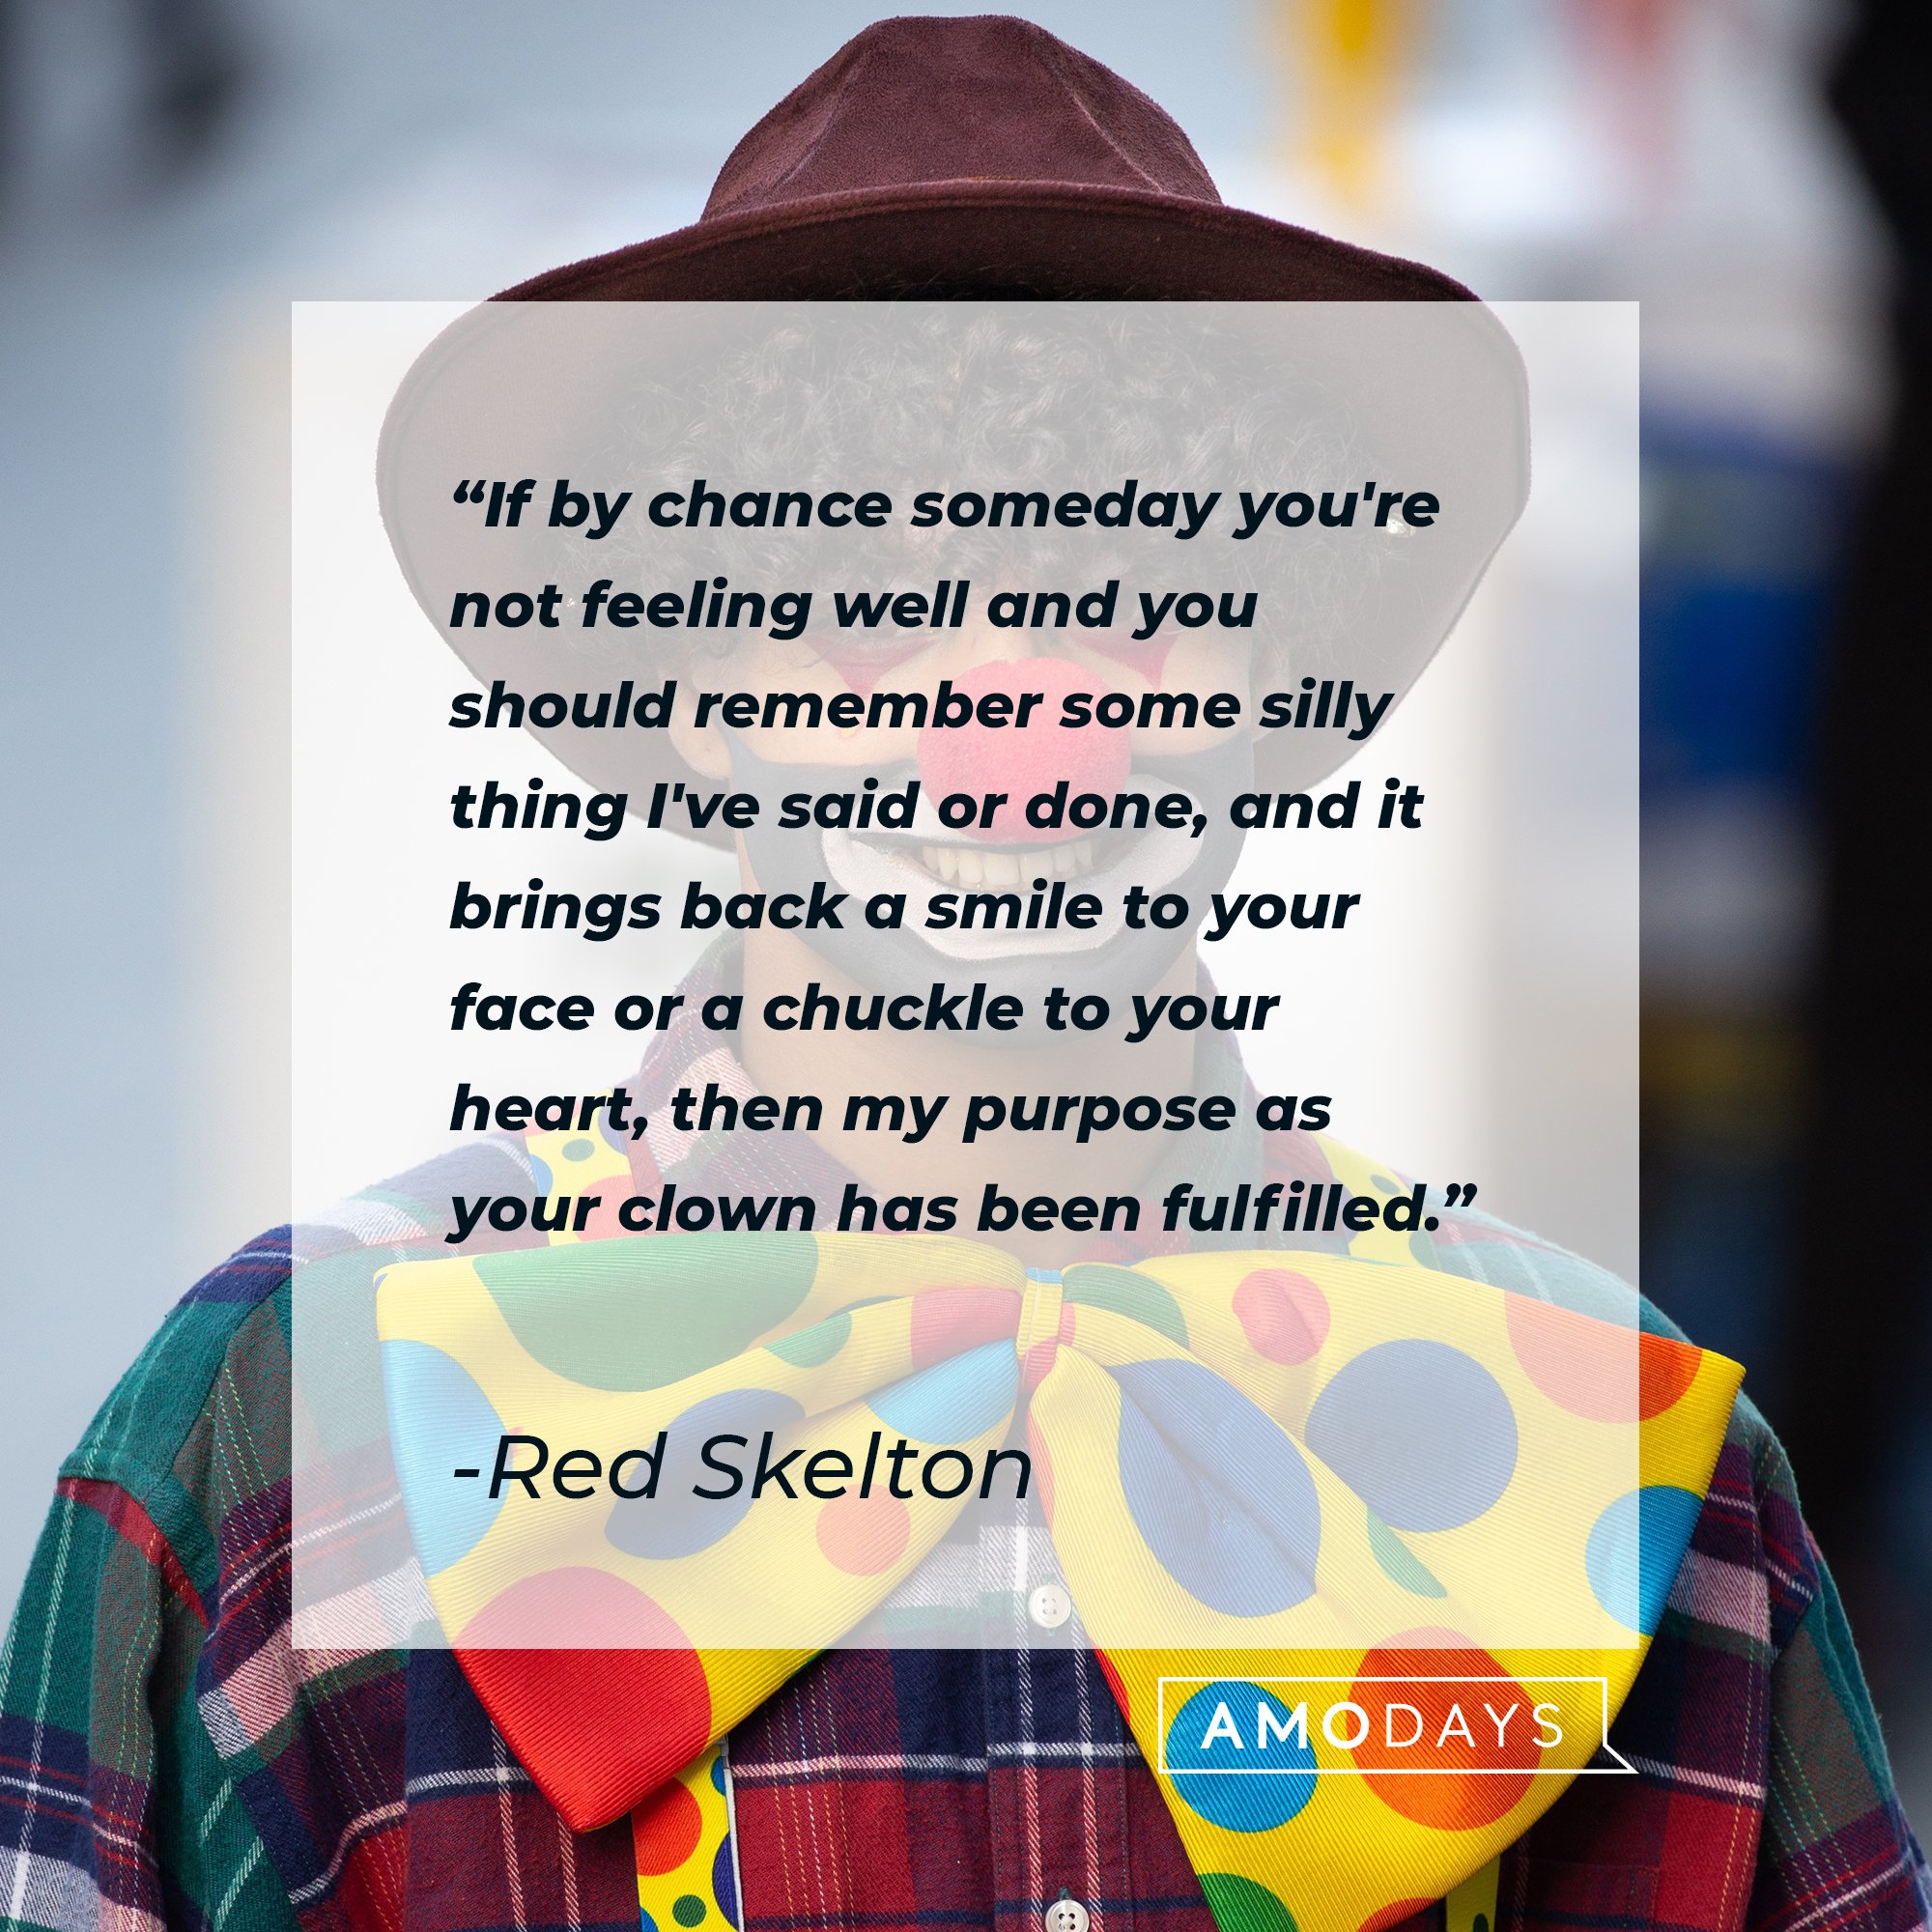 Red Skelton's quote"If by chance some day you're not feeling well and you should remember some silly thing I've said or done and it brings back a smile to your face or a chuckle to your heart, then my purpose as your clown has been fulfilled." | Source: Unsplash.com